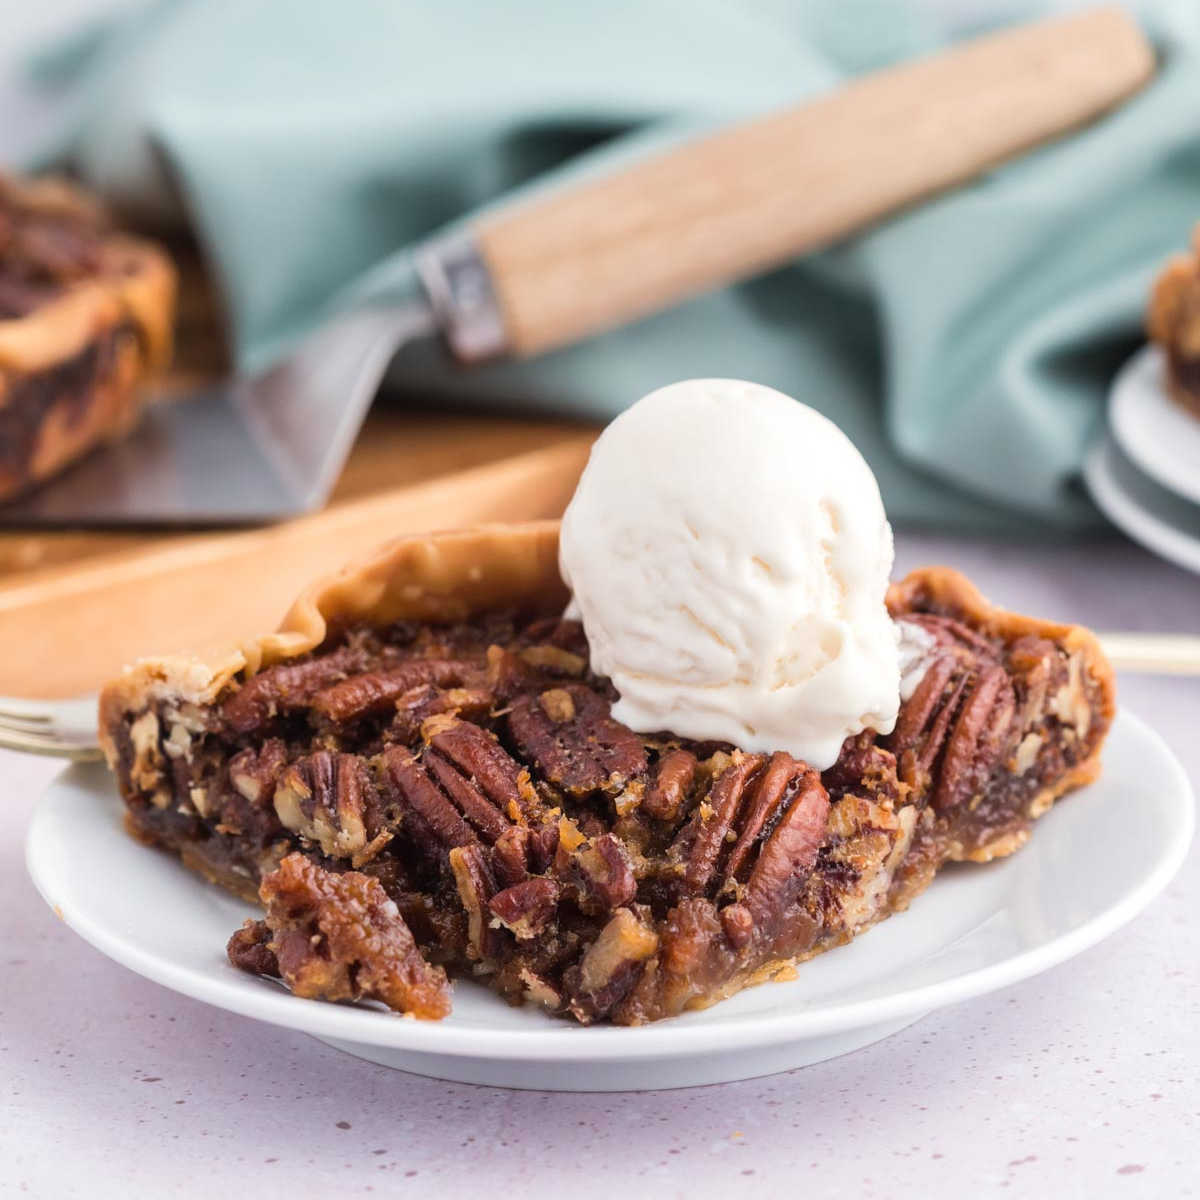 A slice of pecan pie on a white plate with ice cream